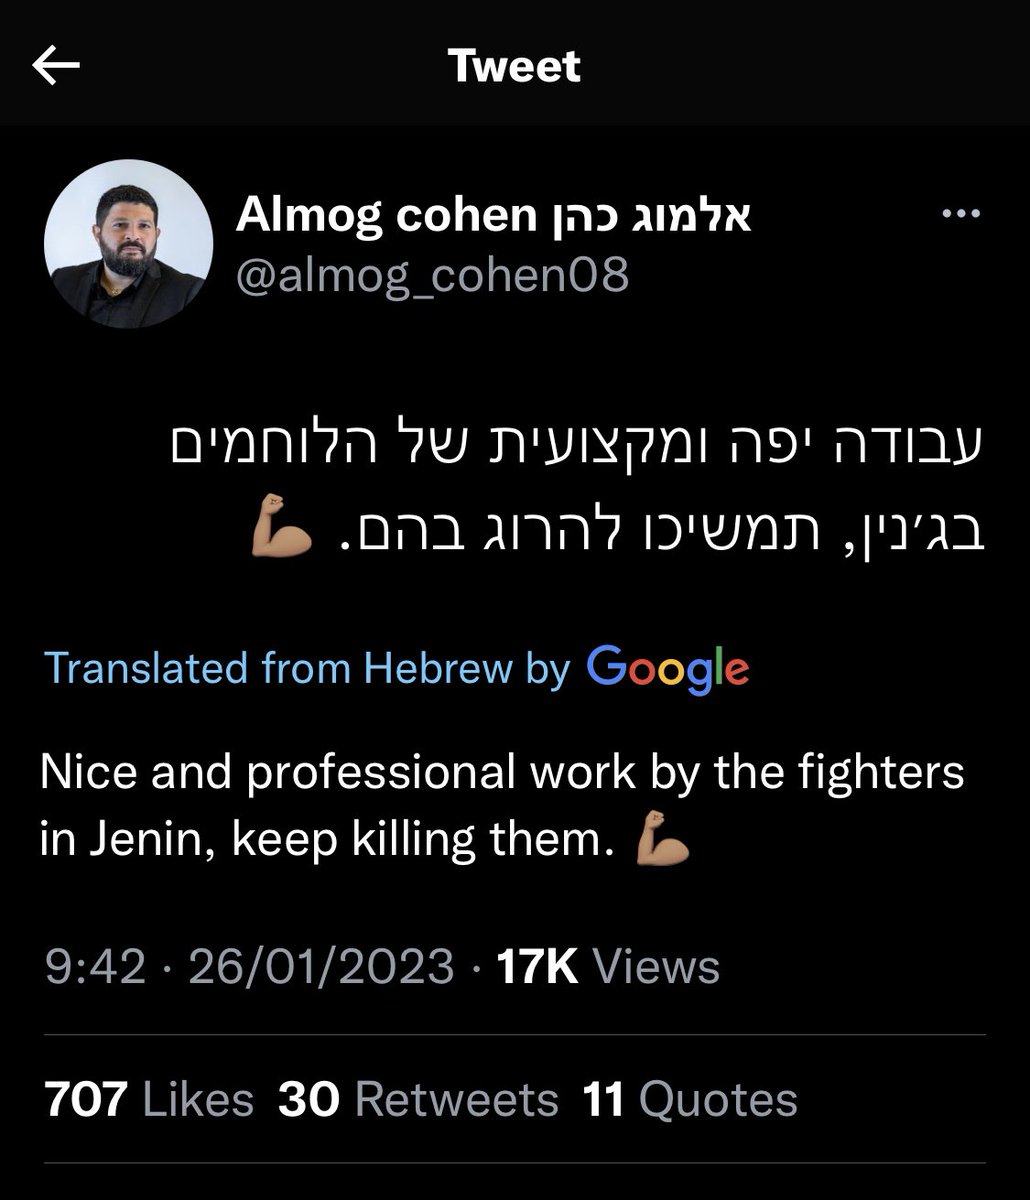 Israeli Knesset member praising the killing of 9 Palestinians today and calling for more.